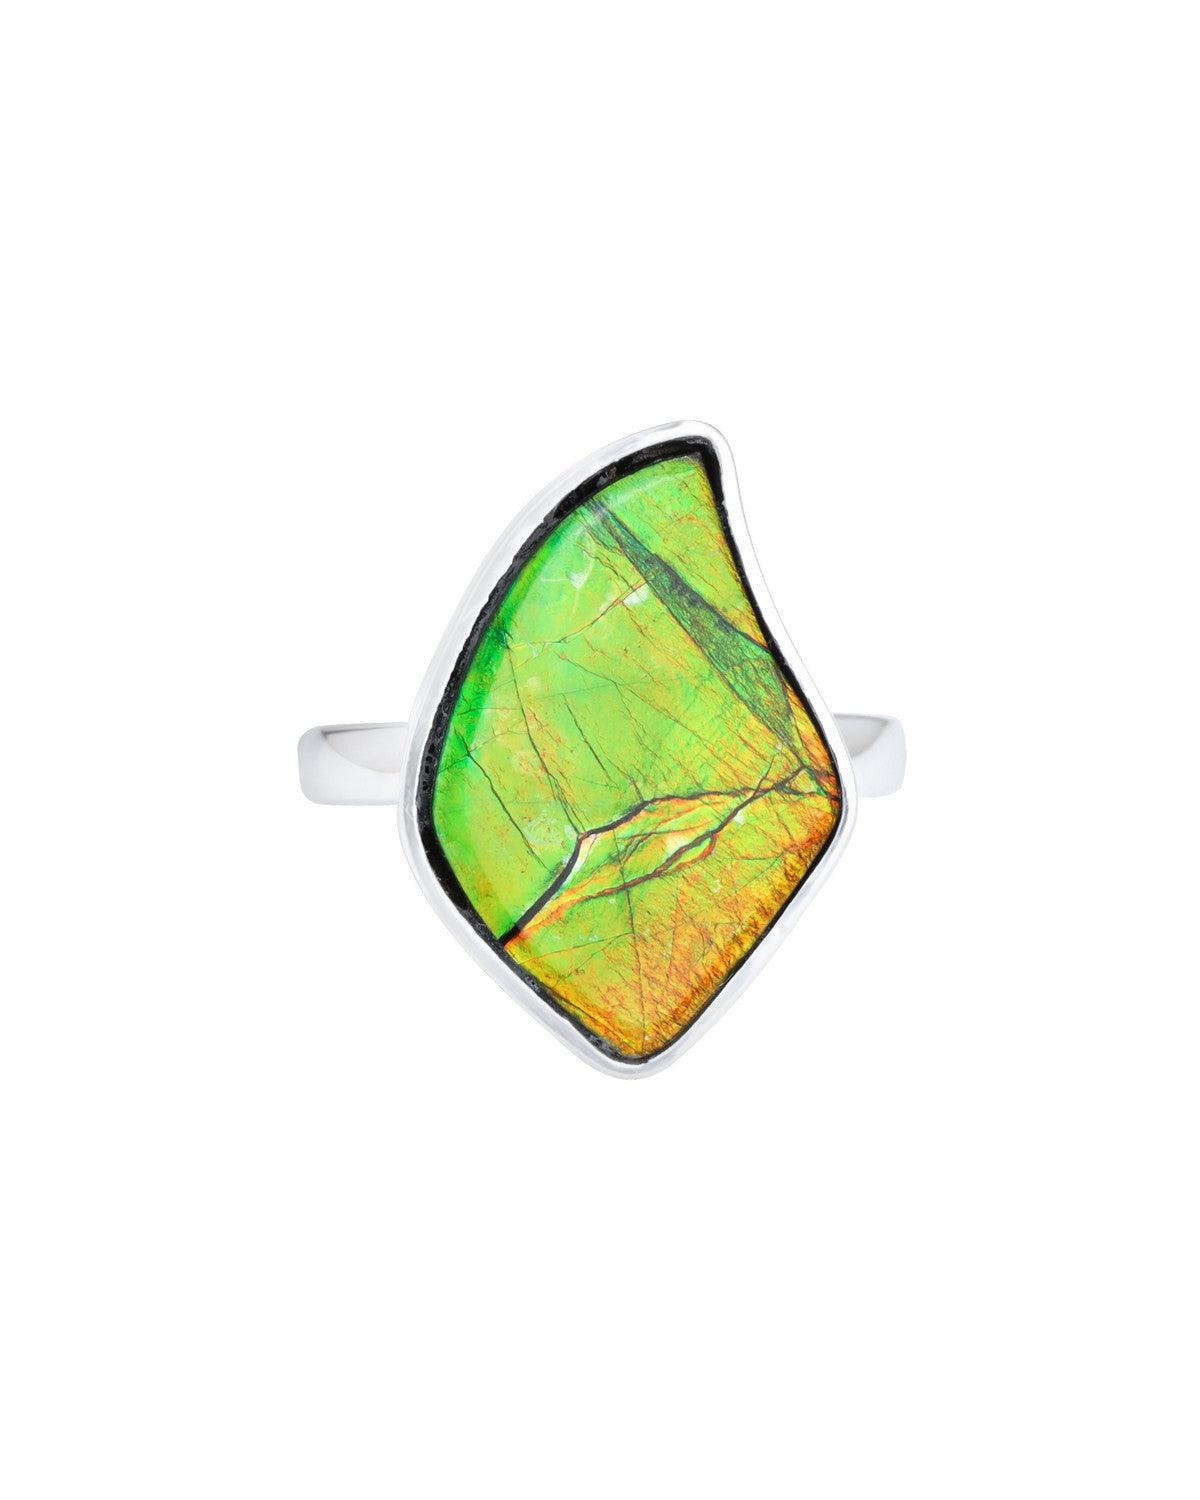 10 Ct. Ammolite Solid 925 Sterling Silver Ring Jewelry - YoTreasure